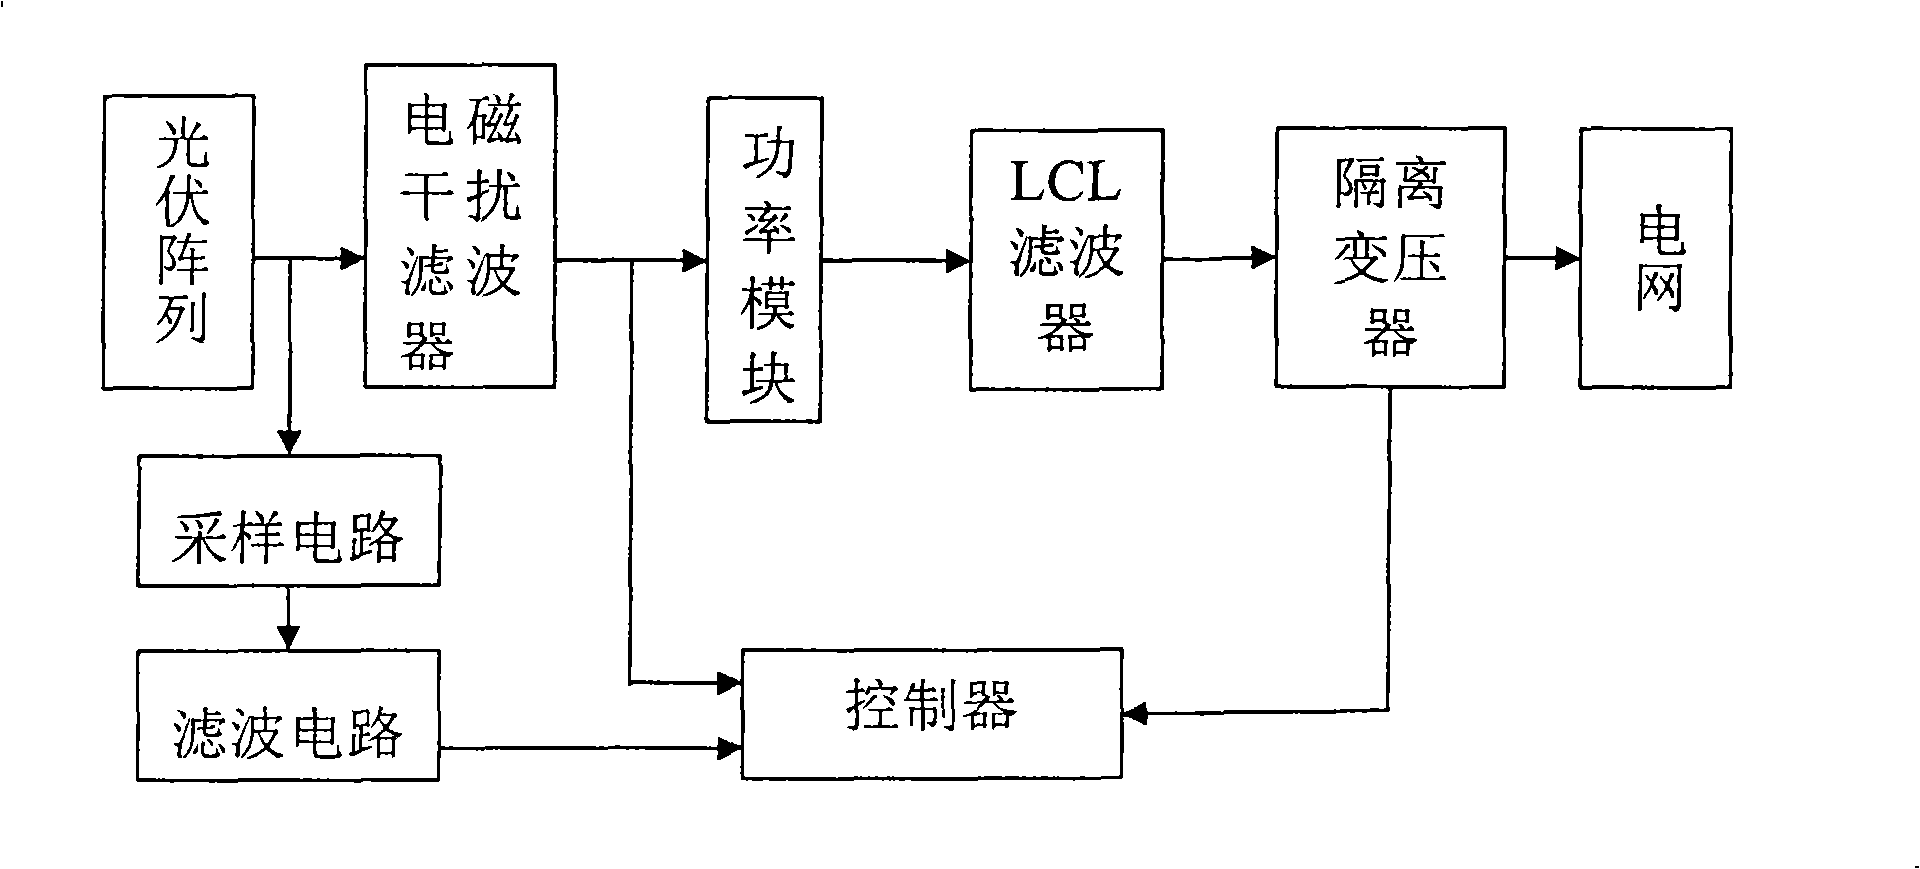 Solar photovoltaic parallel inverter control system based on LCL filtering